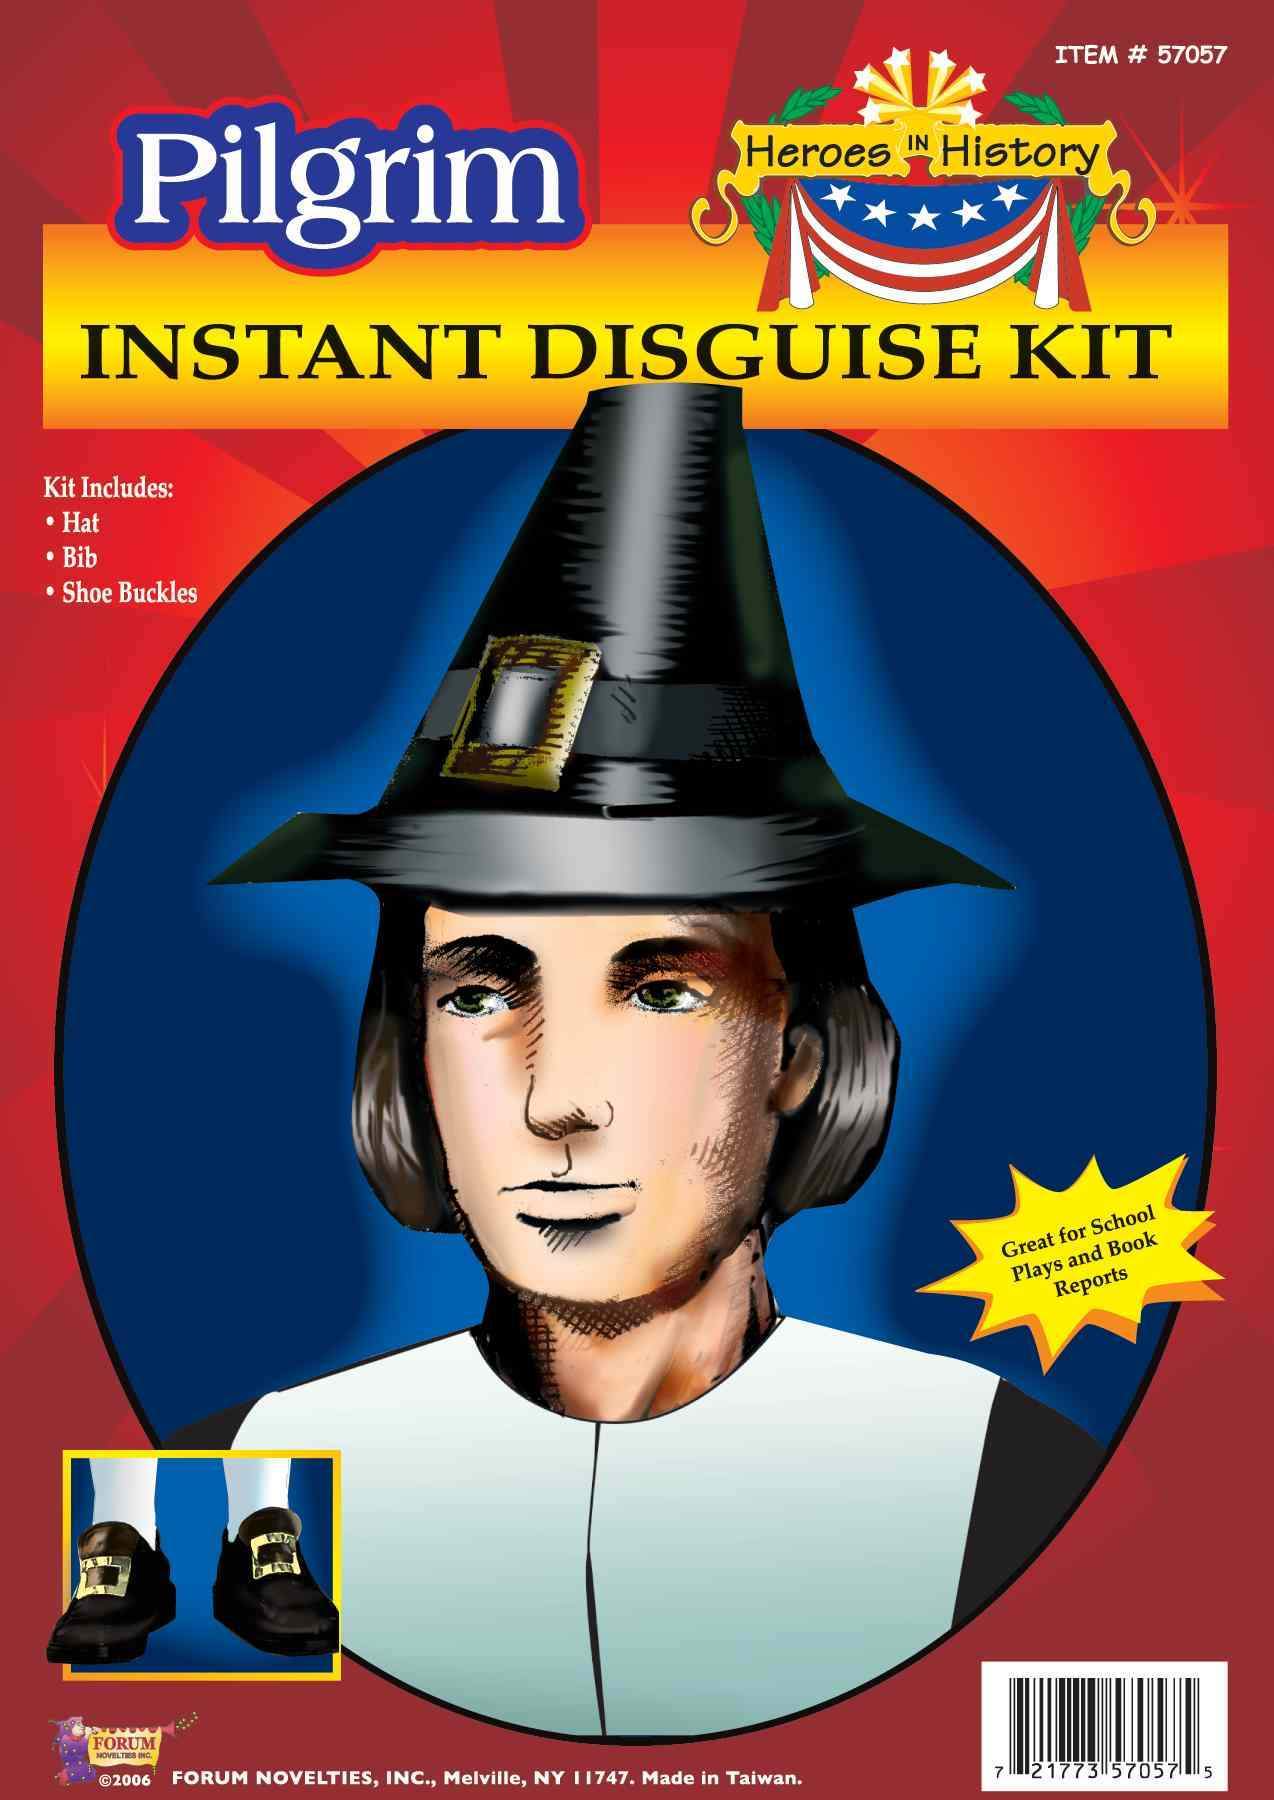 Pilgrim Man Disguise Kit - Heroes In History - JJ's Party House